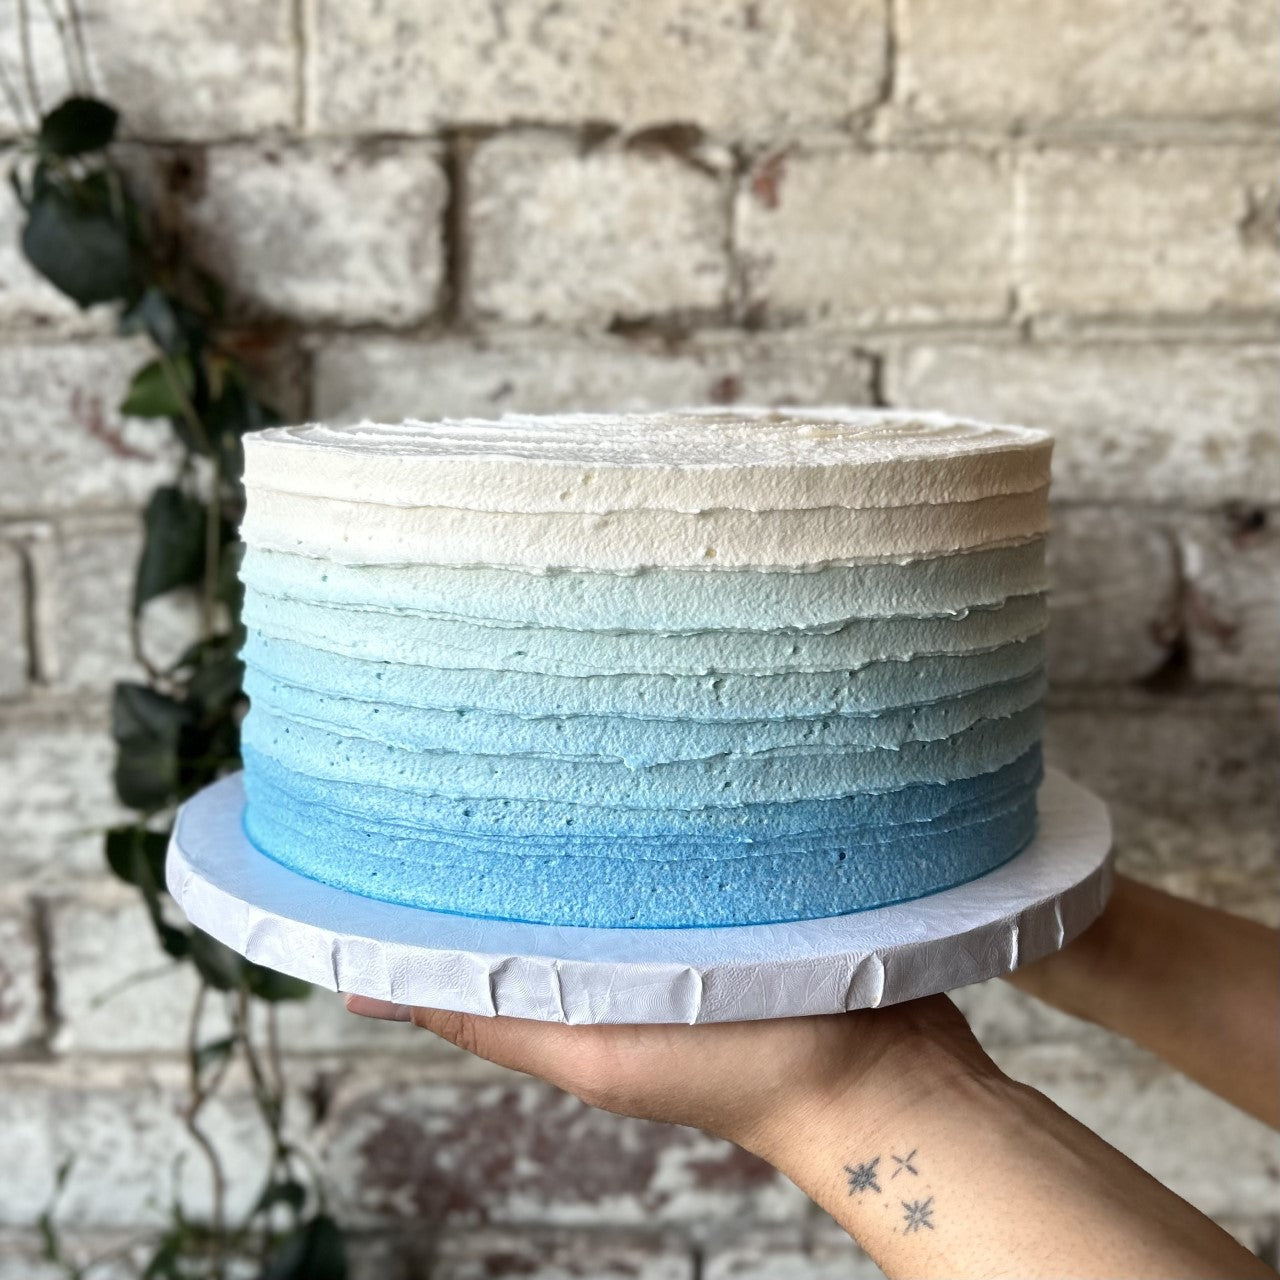 Rustic cake with light blue to white ombre